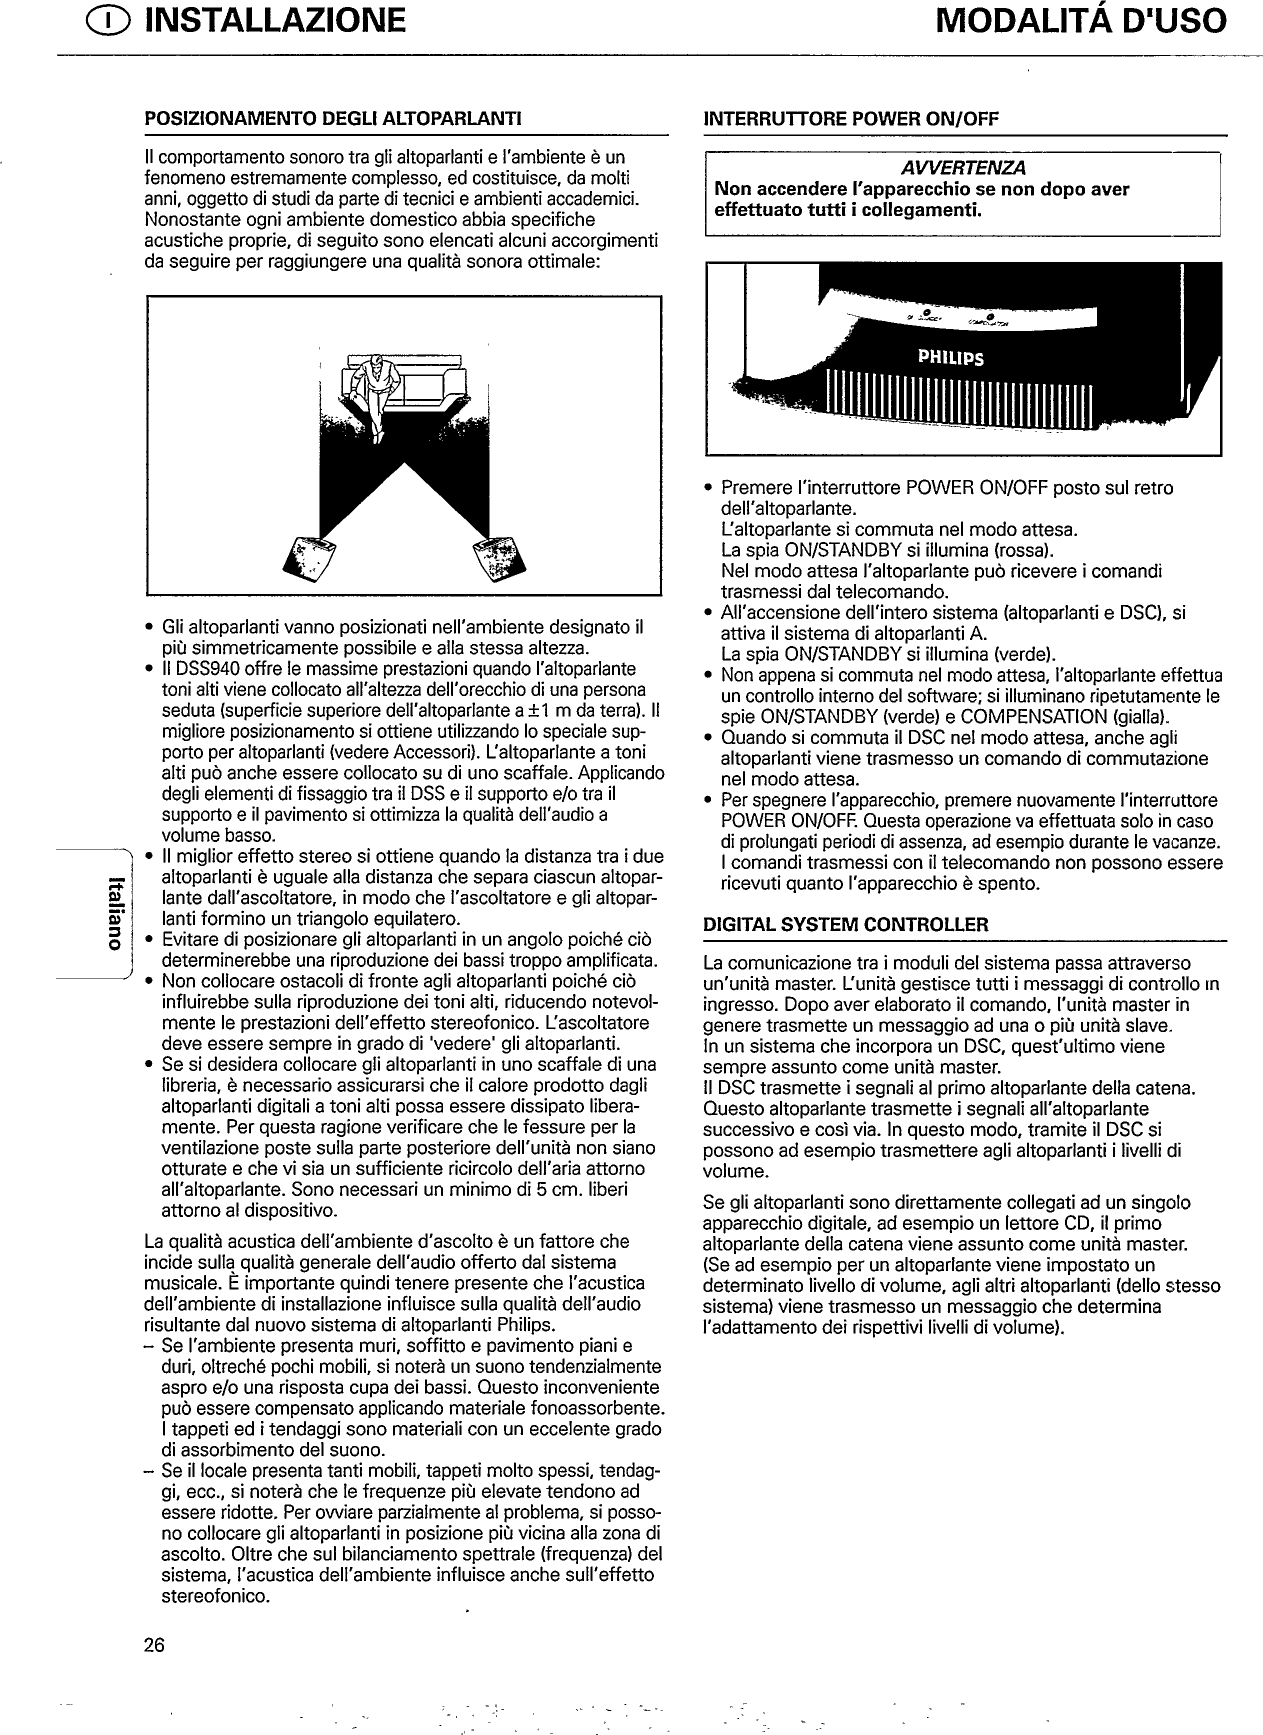 Page 6 of 8 - Philips  DSS940 Dfu Ita